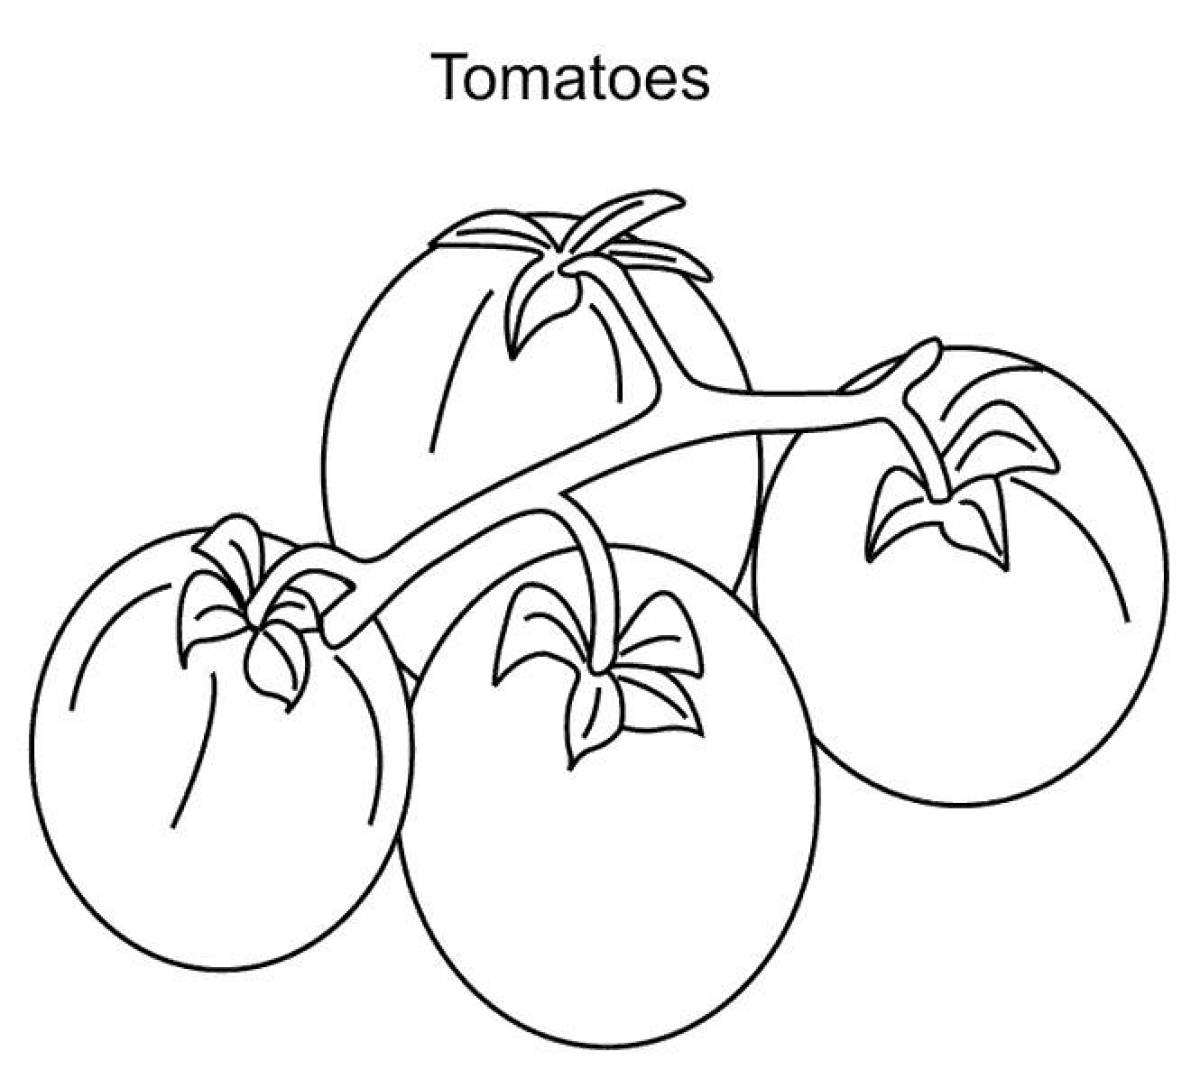 Tomato on a branch